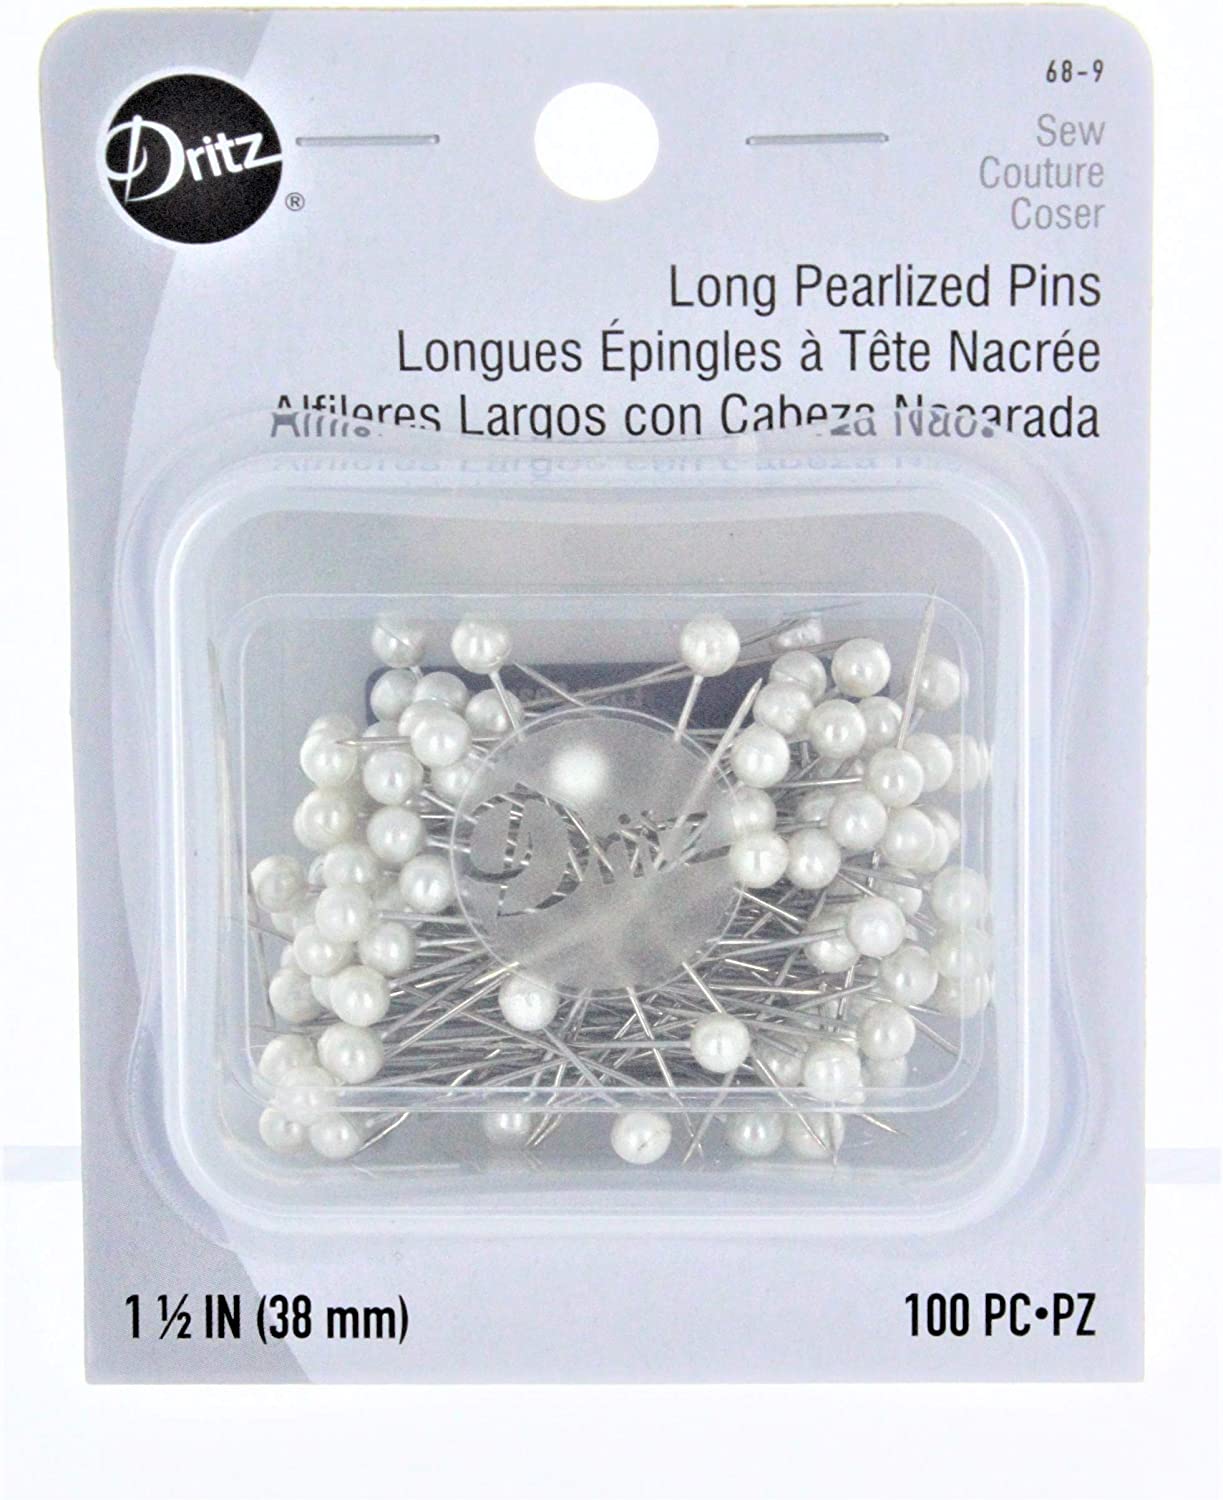 Hovesty Spring-Time Decorative Straight Pins For Sewing, 200-Count